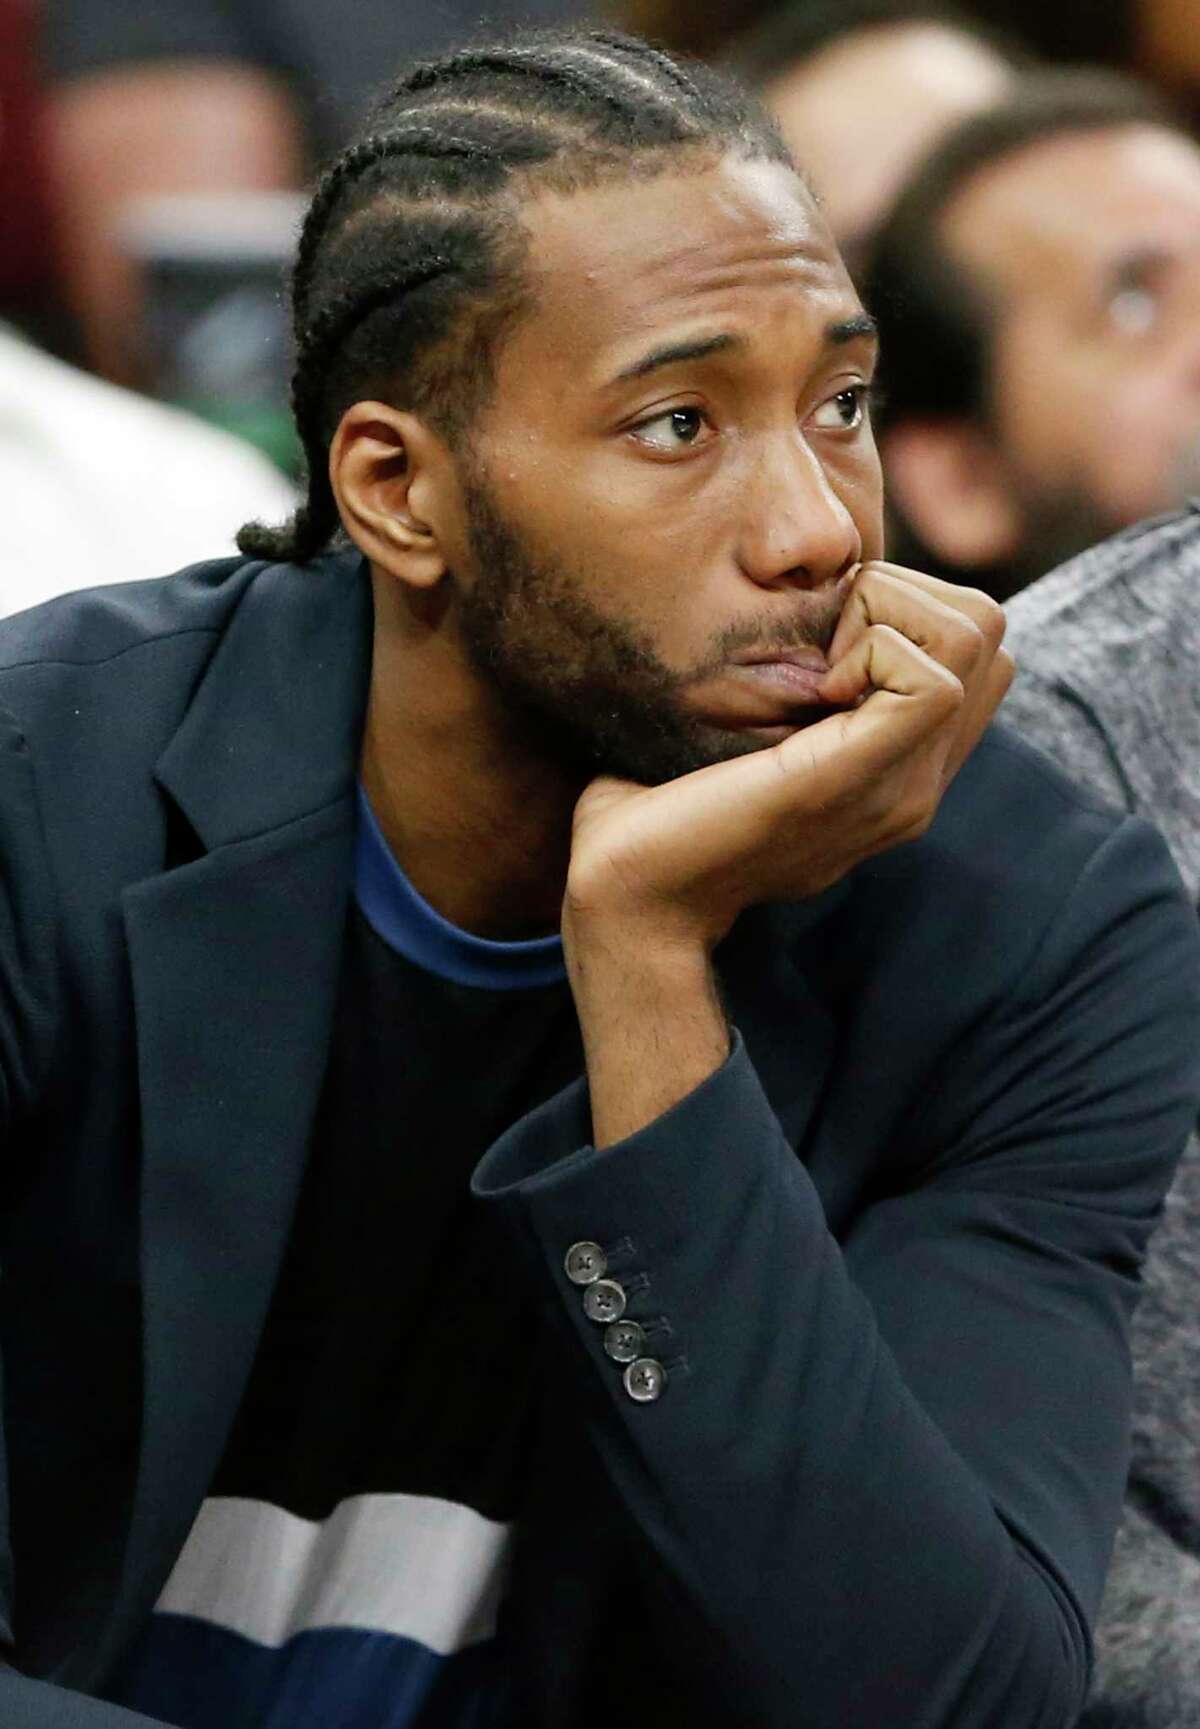 San Antonio Spurs forward Kawhi Leonard (2) watches first half action against the Memphis Grizzlies from the bench Monday March 5, 2018 at the AT&T Center.